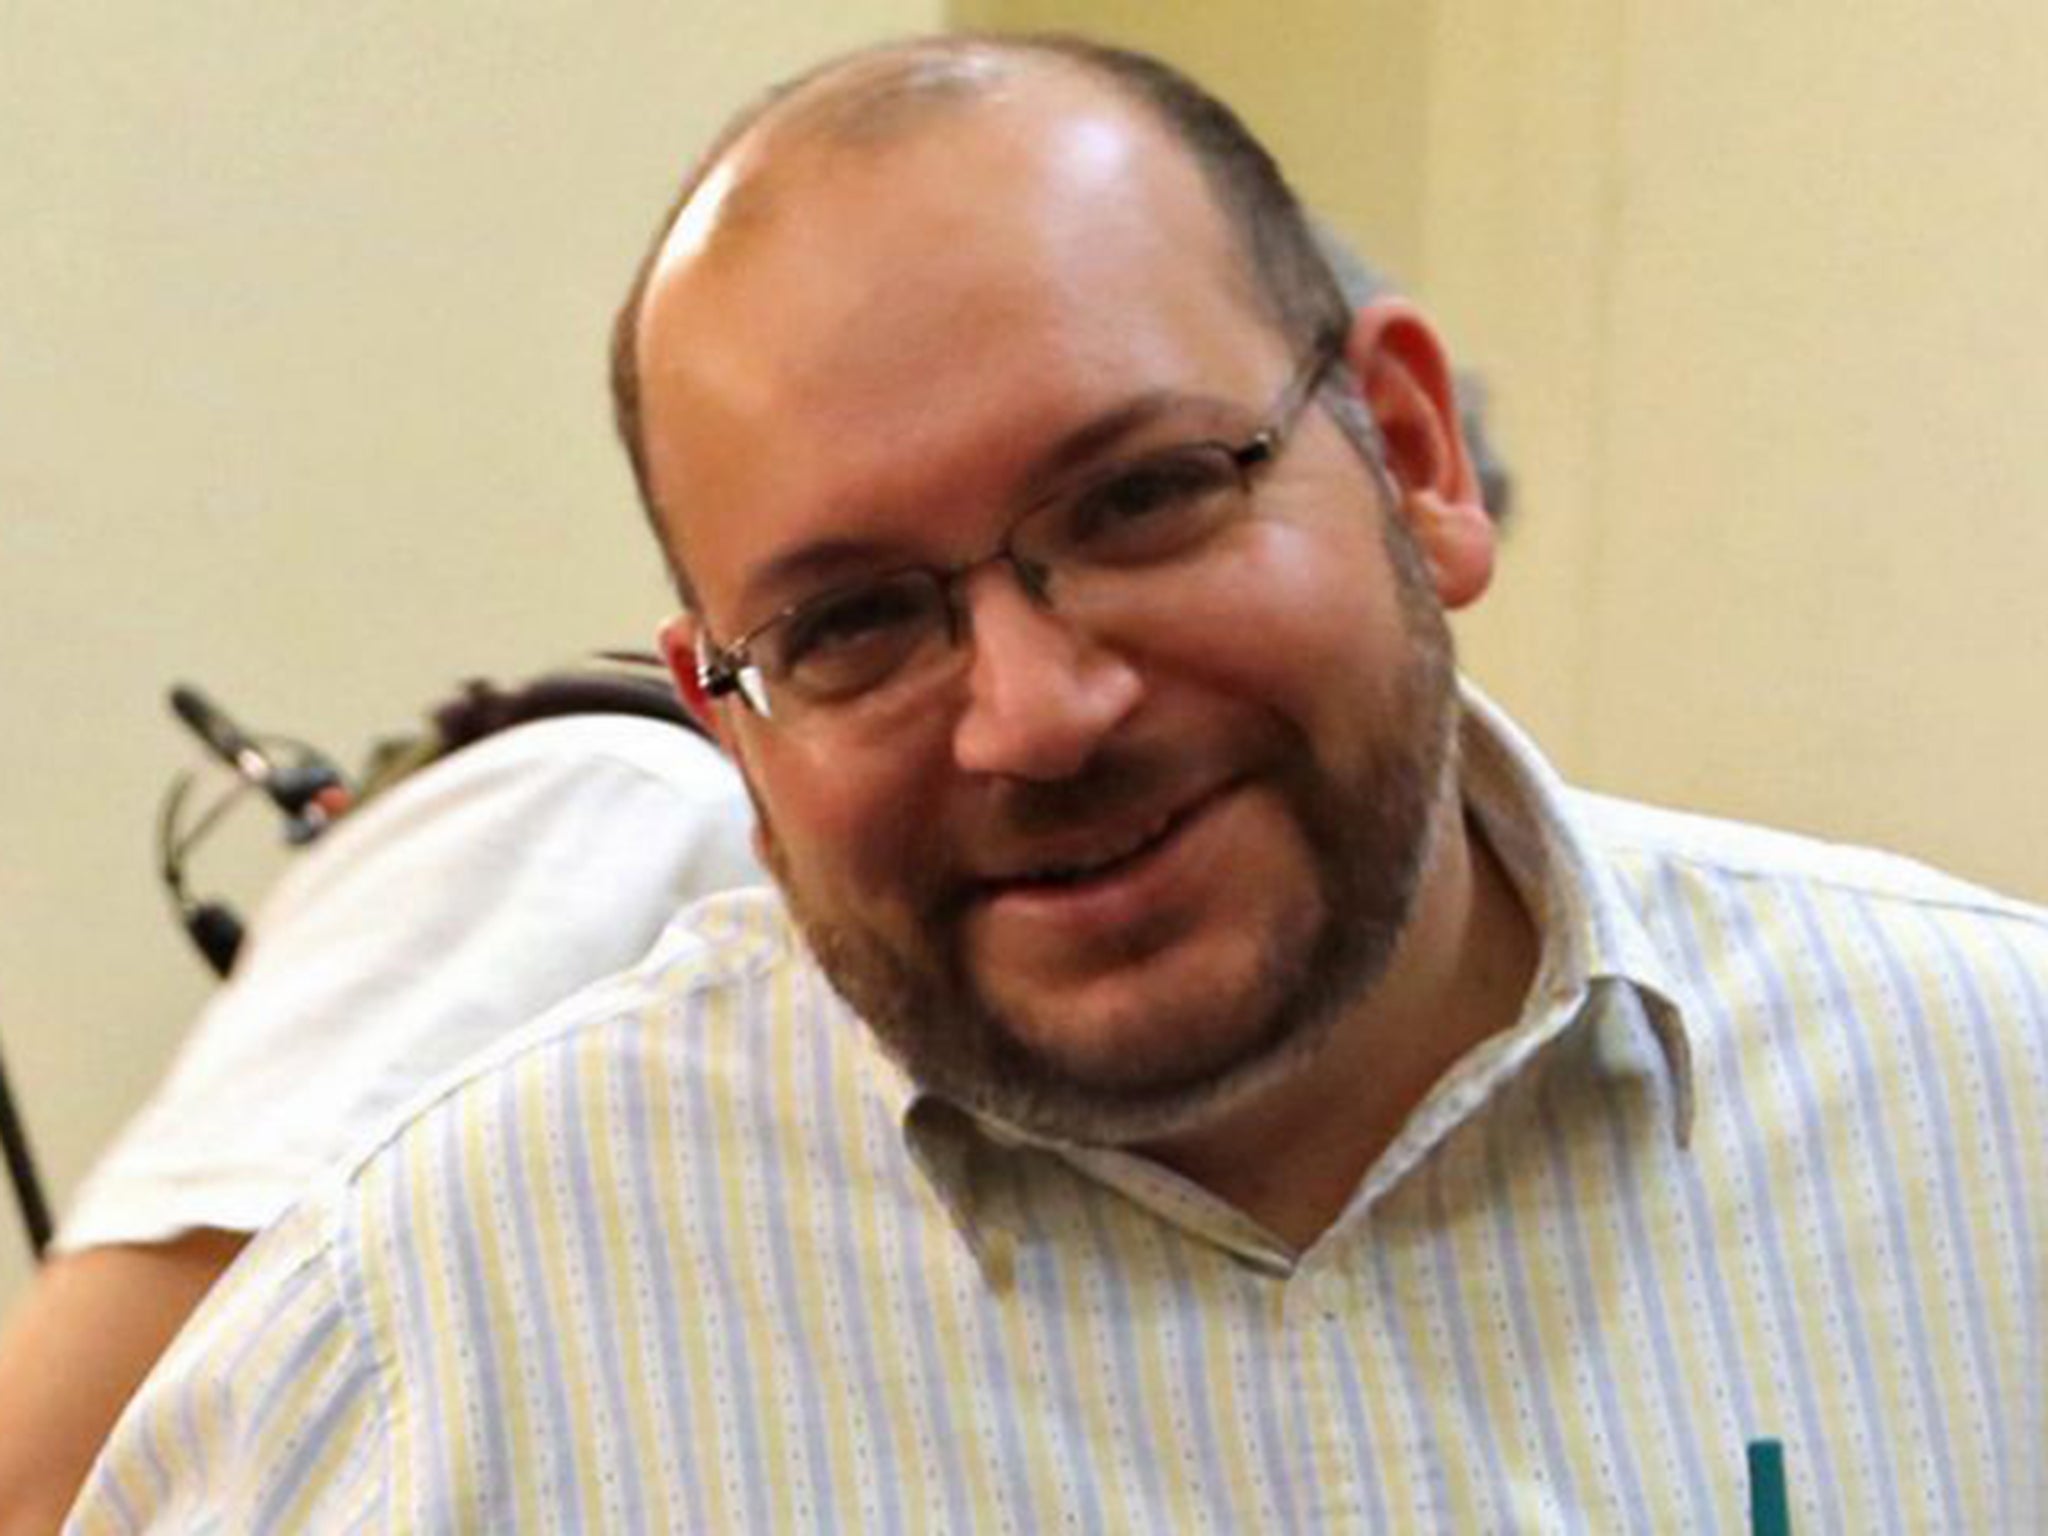 Jason Rezaian’s incarceration was the longest for a Western journalist in Iran since the 1979 revolution